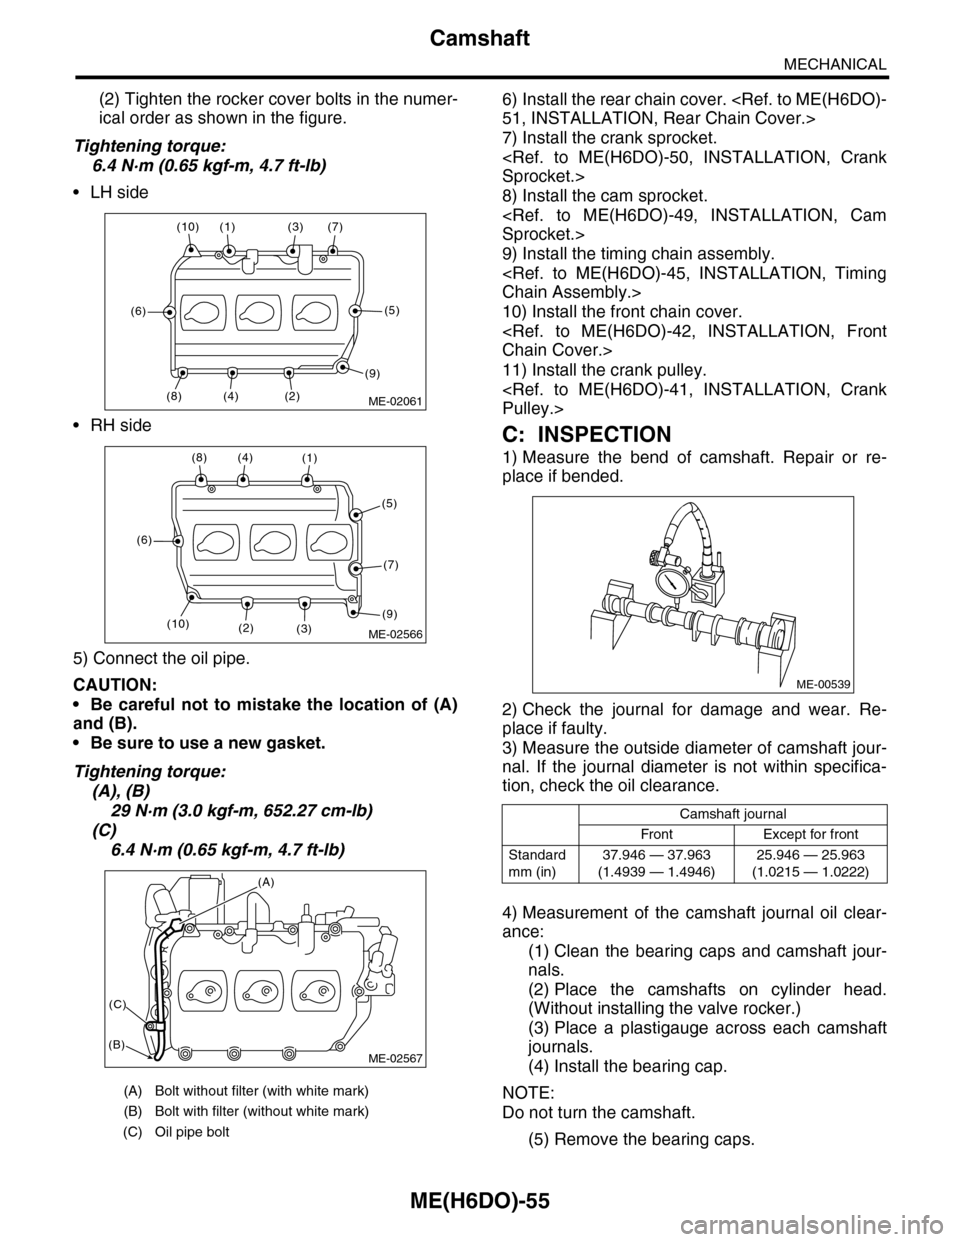 SUBARU TRIBECA 2009 1.G Service Workshop Manual ME(H6DO)-55
Camshaft
MECHANICAL
(2) Tighten the rocker cover bolts in the numer-
ical order as shown in the figure.
Tightening torque:
6.4 N·m (0.65 kgf-m, 4.7 ft-lb)
•LH side
•RH side
5) Connect